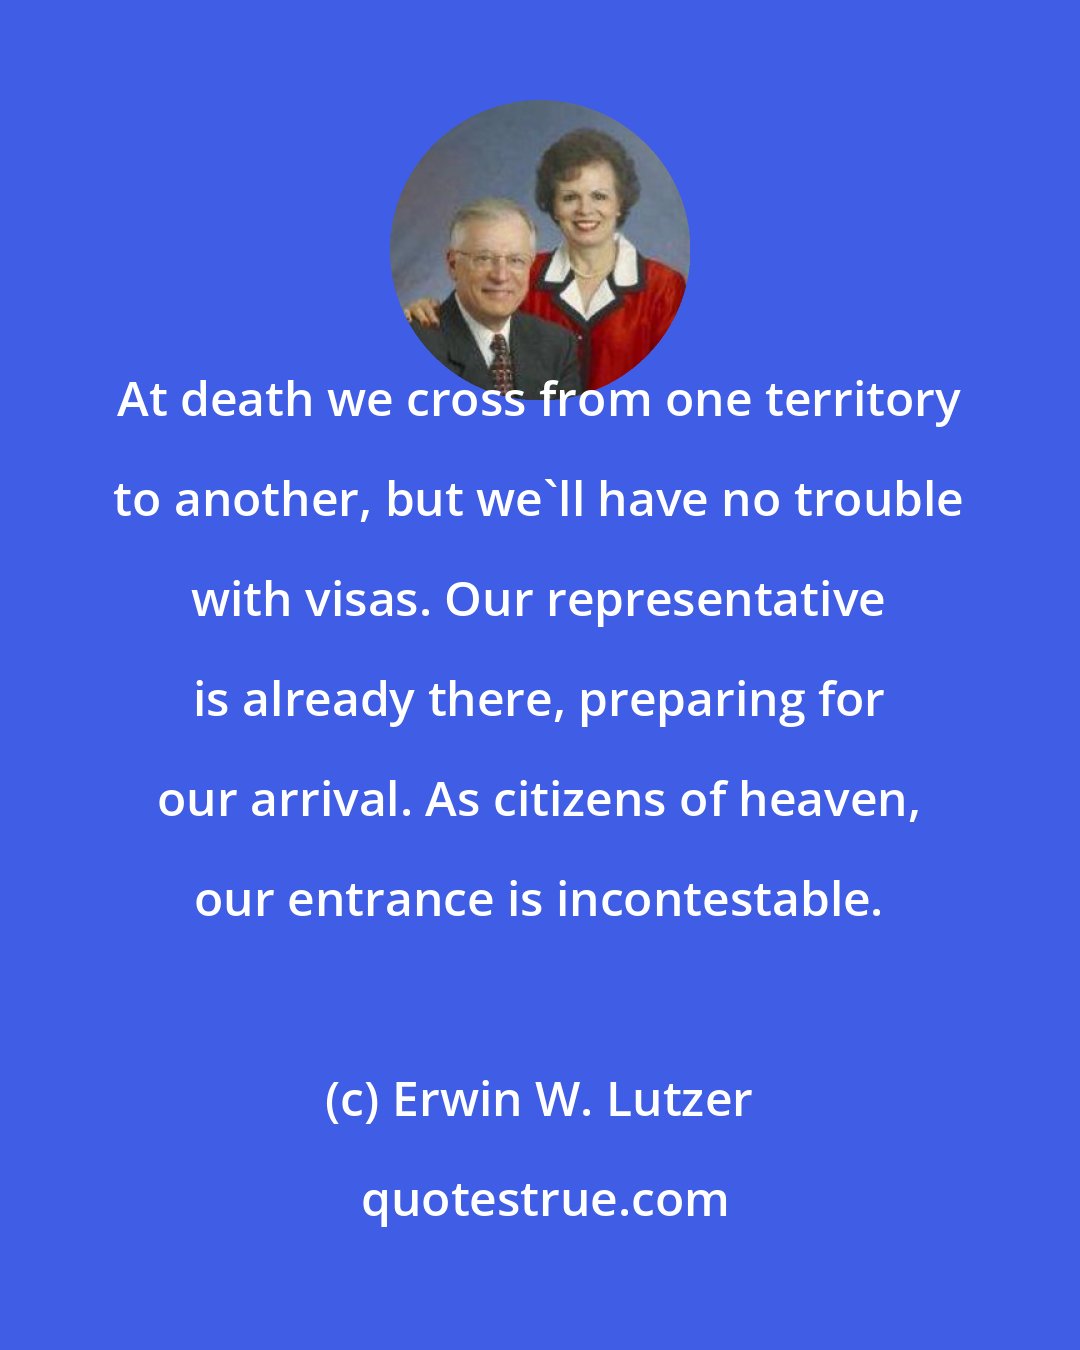 Erwin W. Lutzer: At death we cross from one territory to another, but we'll have no trouble with visas. Our representative is already there, preparing for our arrival. As citizens of heaven, our entrance is incontestable.